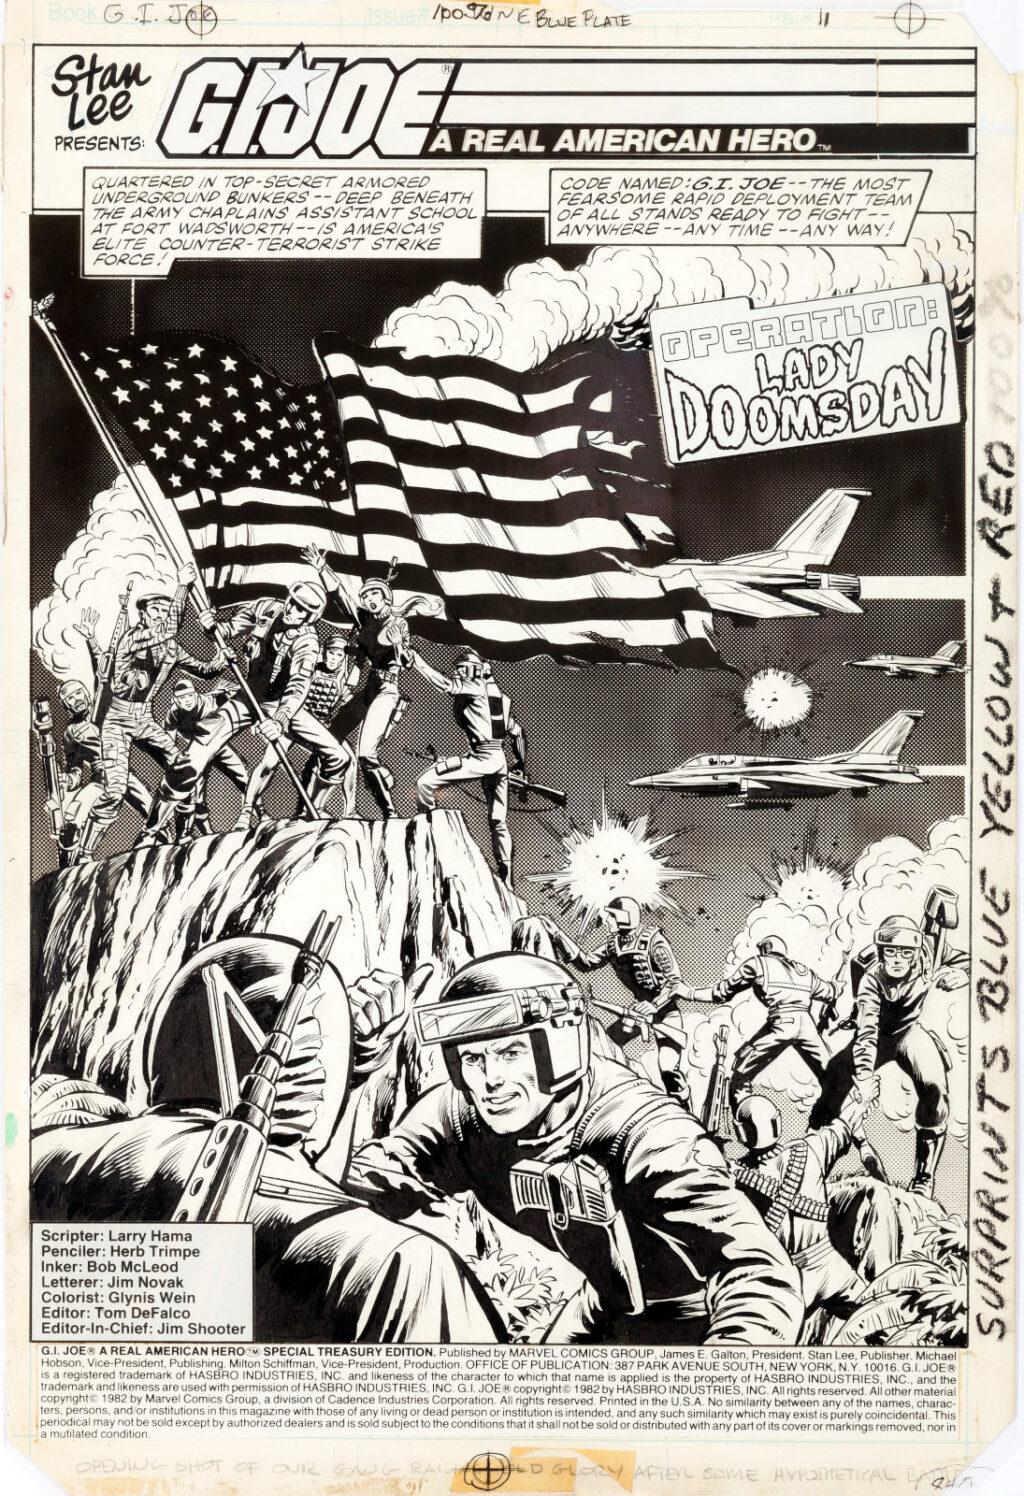 G.I. Joe A Real American Hero issue 1 page 1 by Herb Trimpe and Bob McLeod